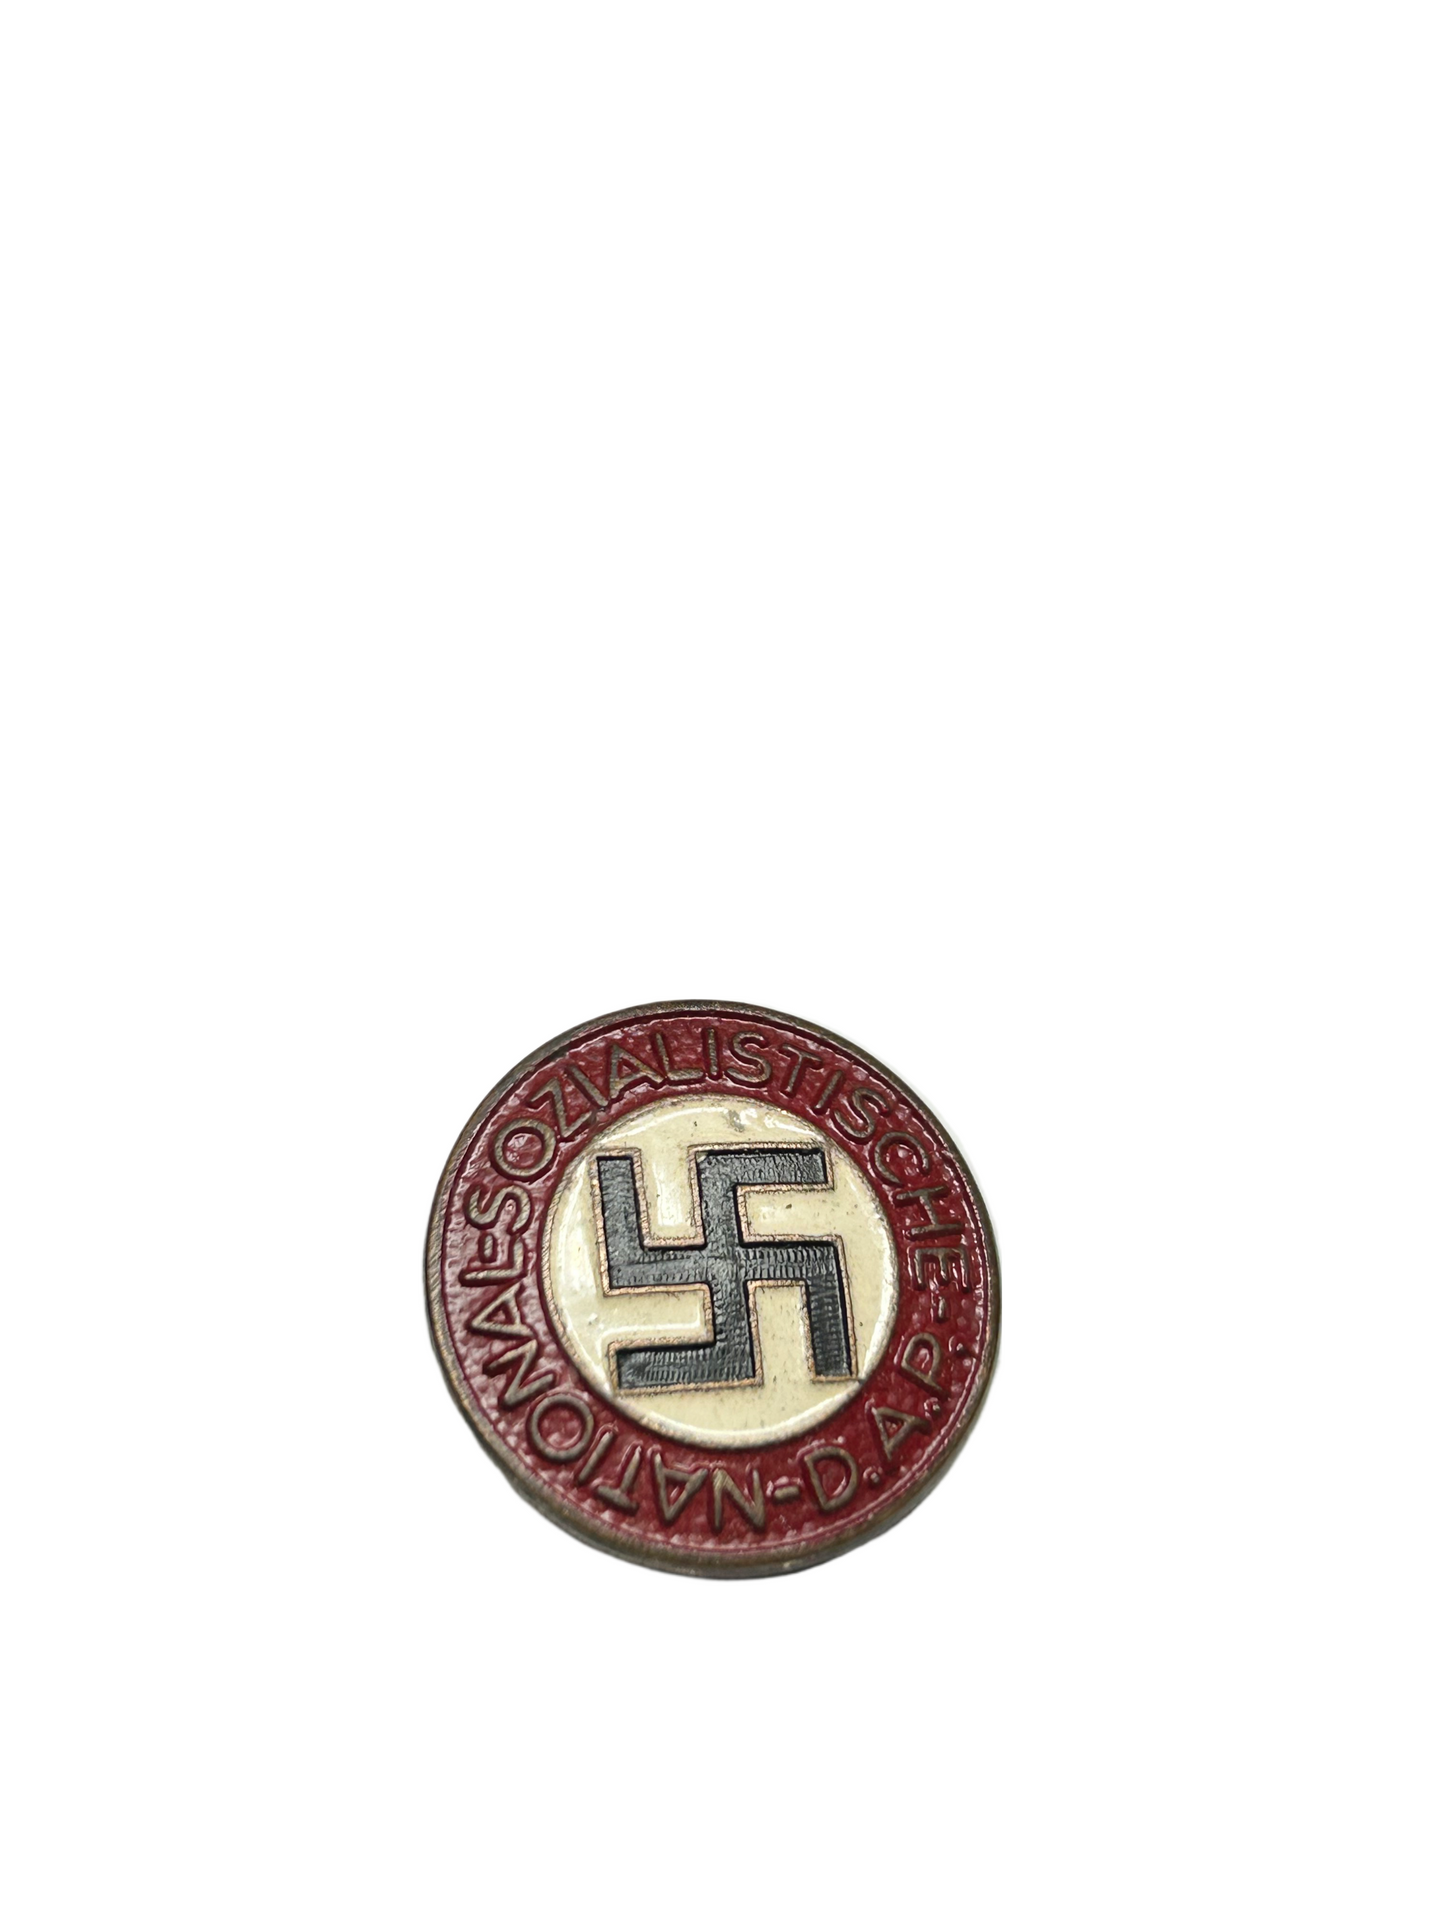 NSDAP Painted Party Badge/Pin RZM M7/90